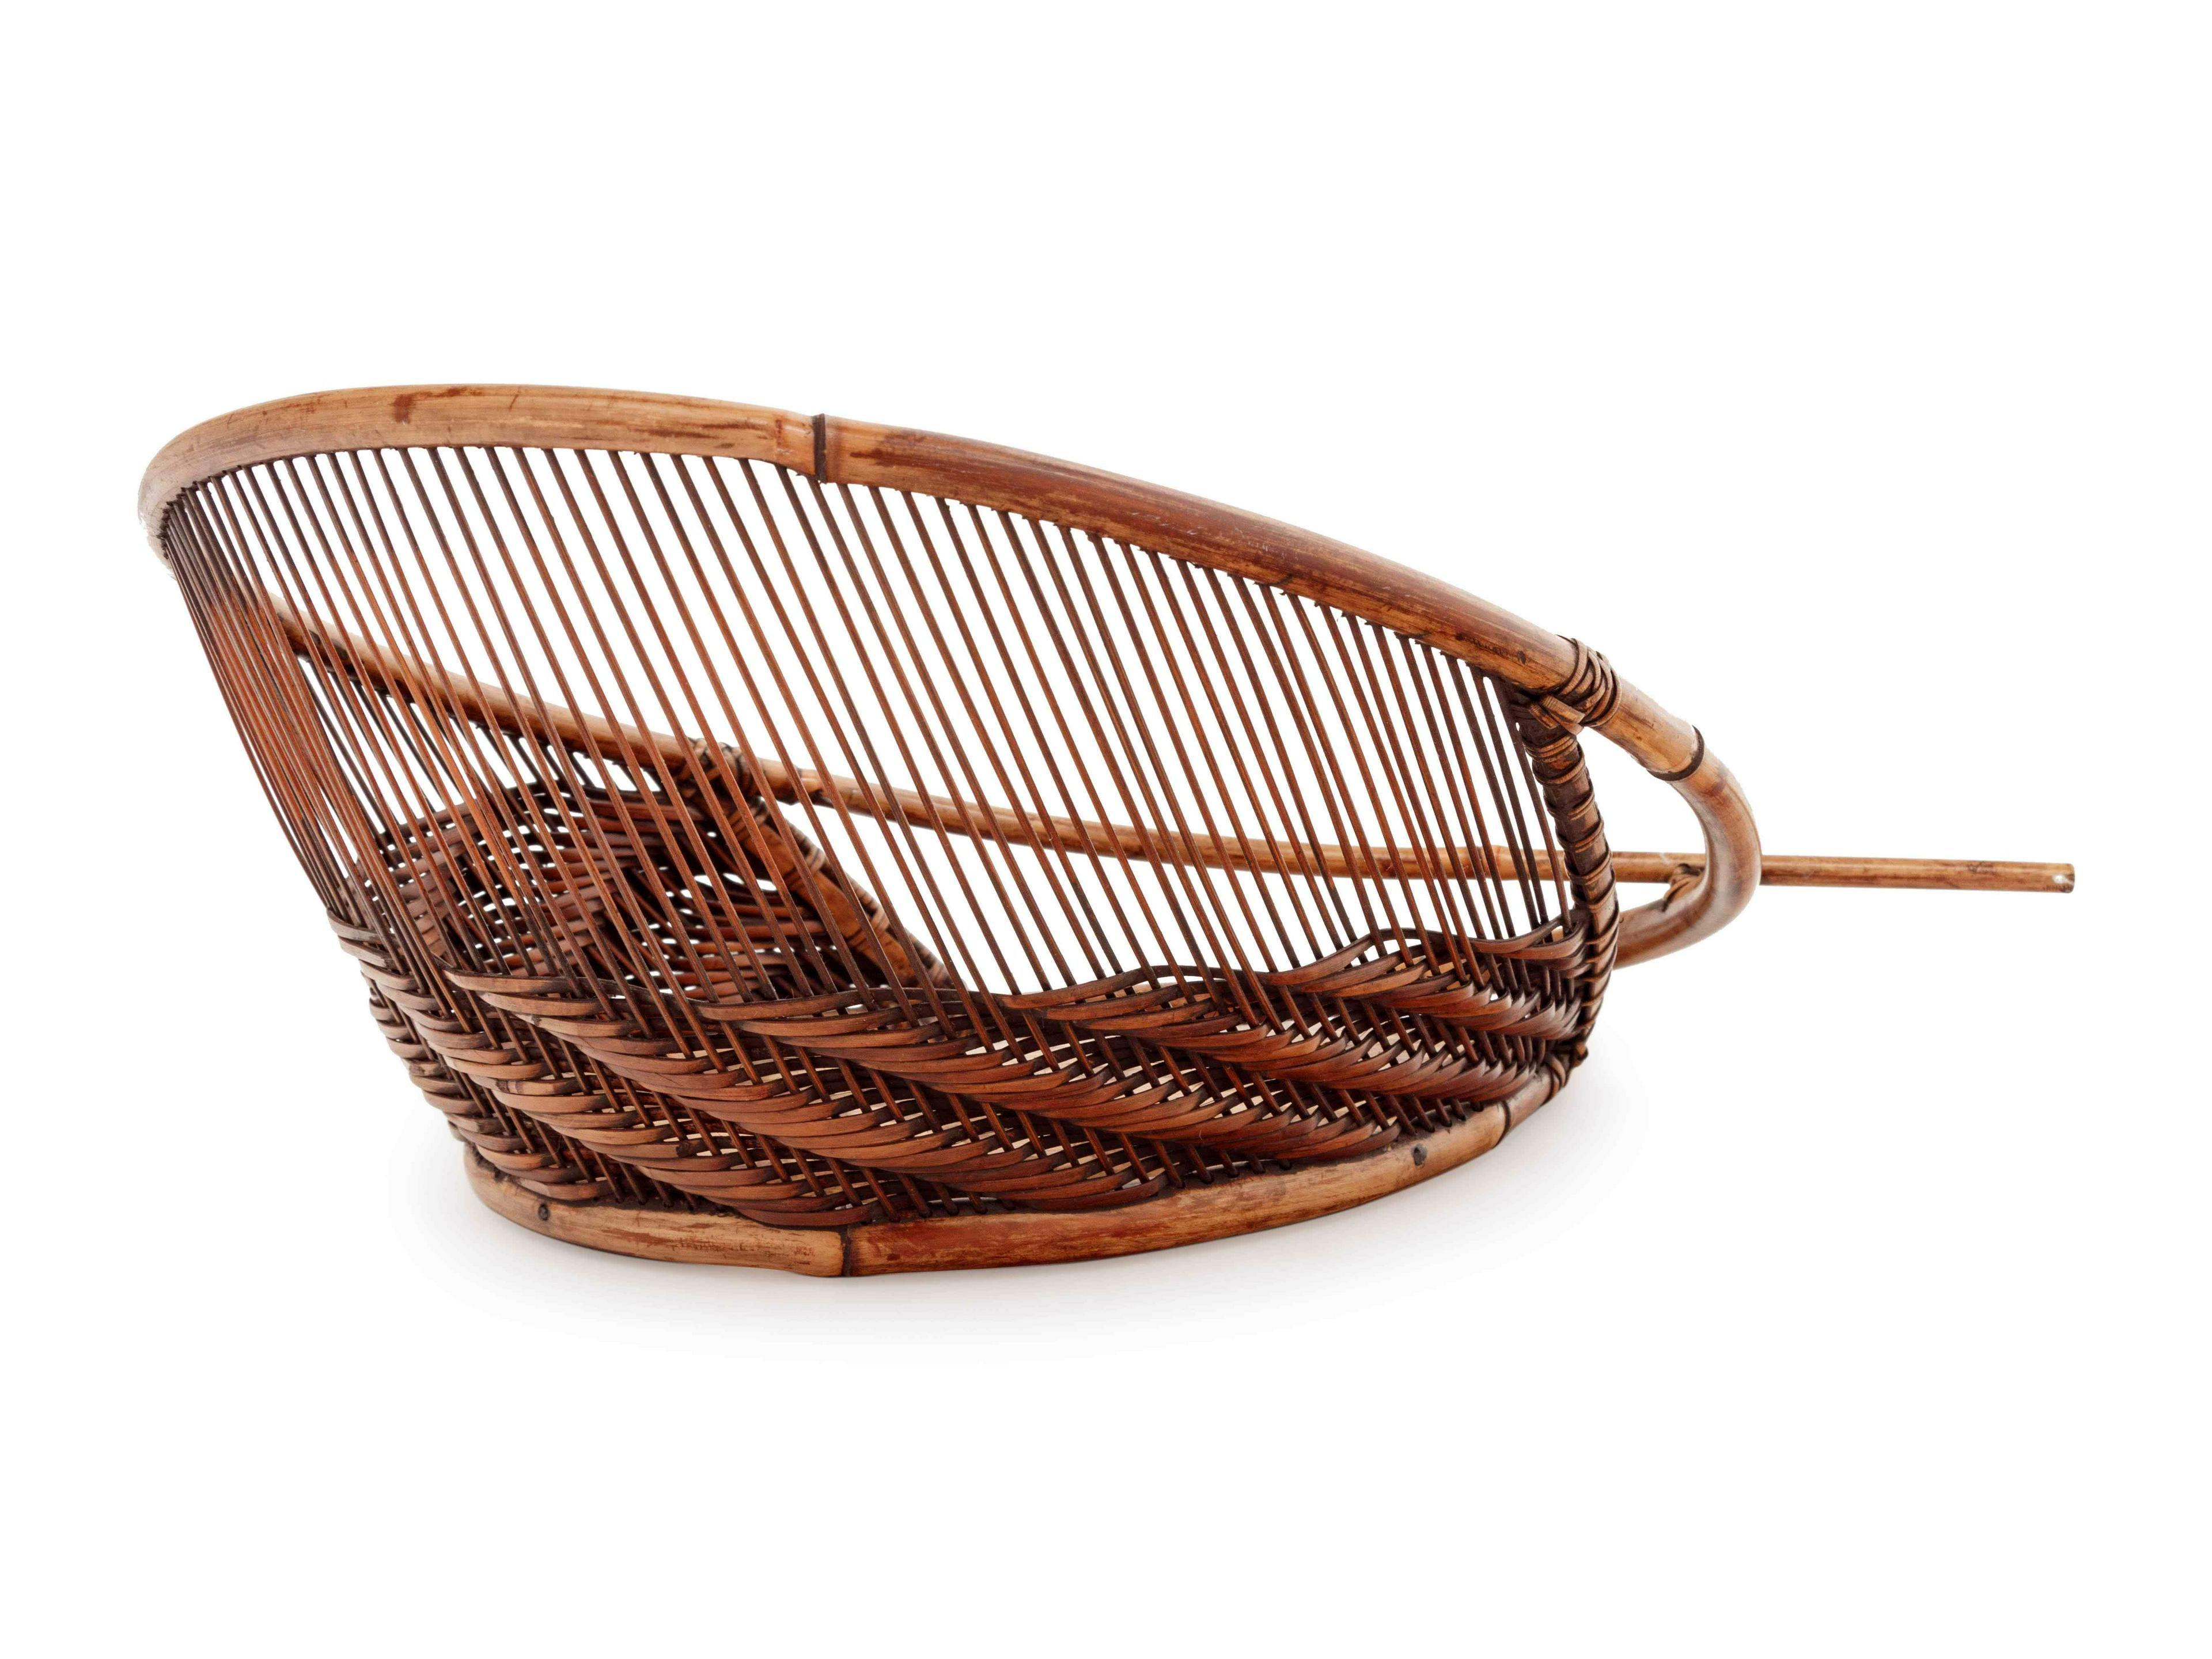 A bamboo table top sculpture by Japanese bamboo artist Honma Hideaki (b. 1959) made in early 2000s. The basket form sculpture was a creative ikebana and could be used as such or simply as a okimono (decorative piece). The piece is of an unusual oval